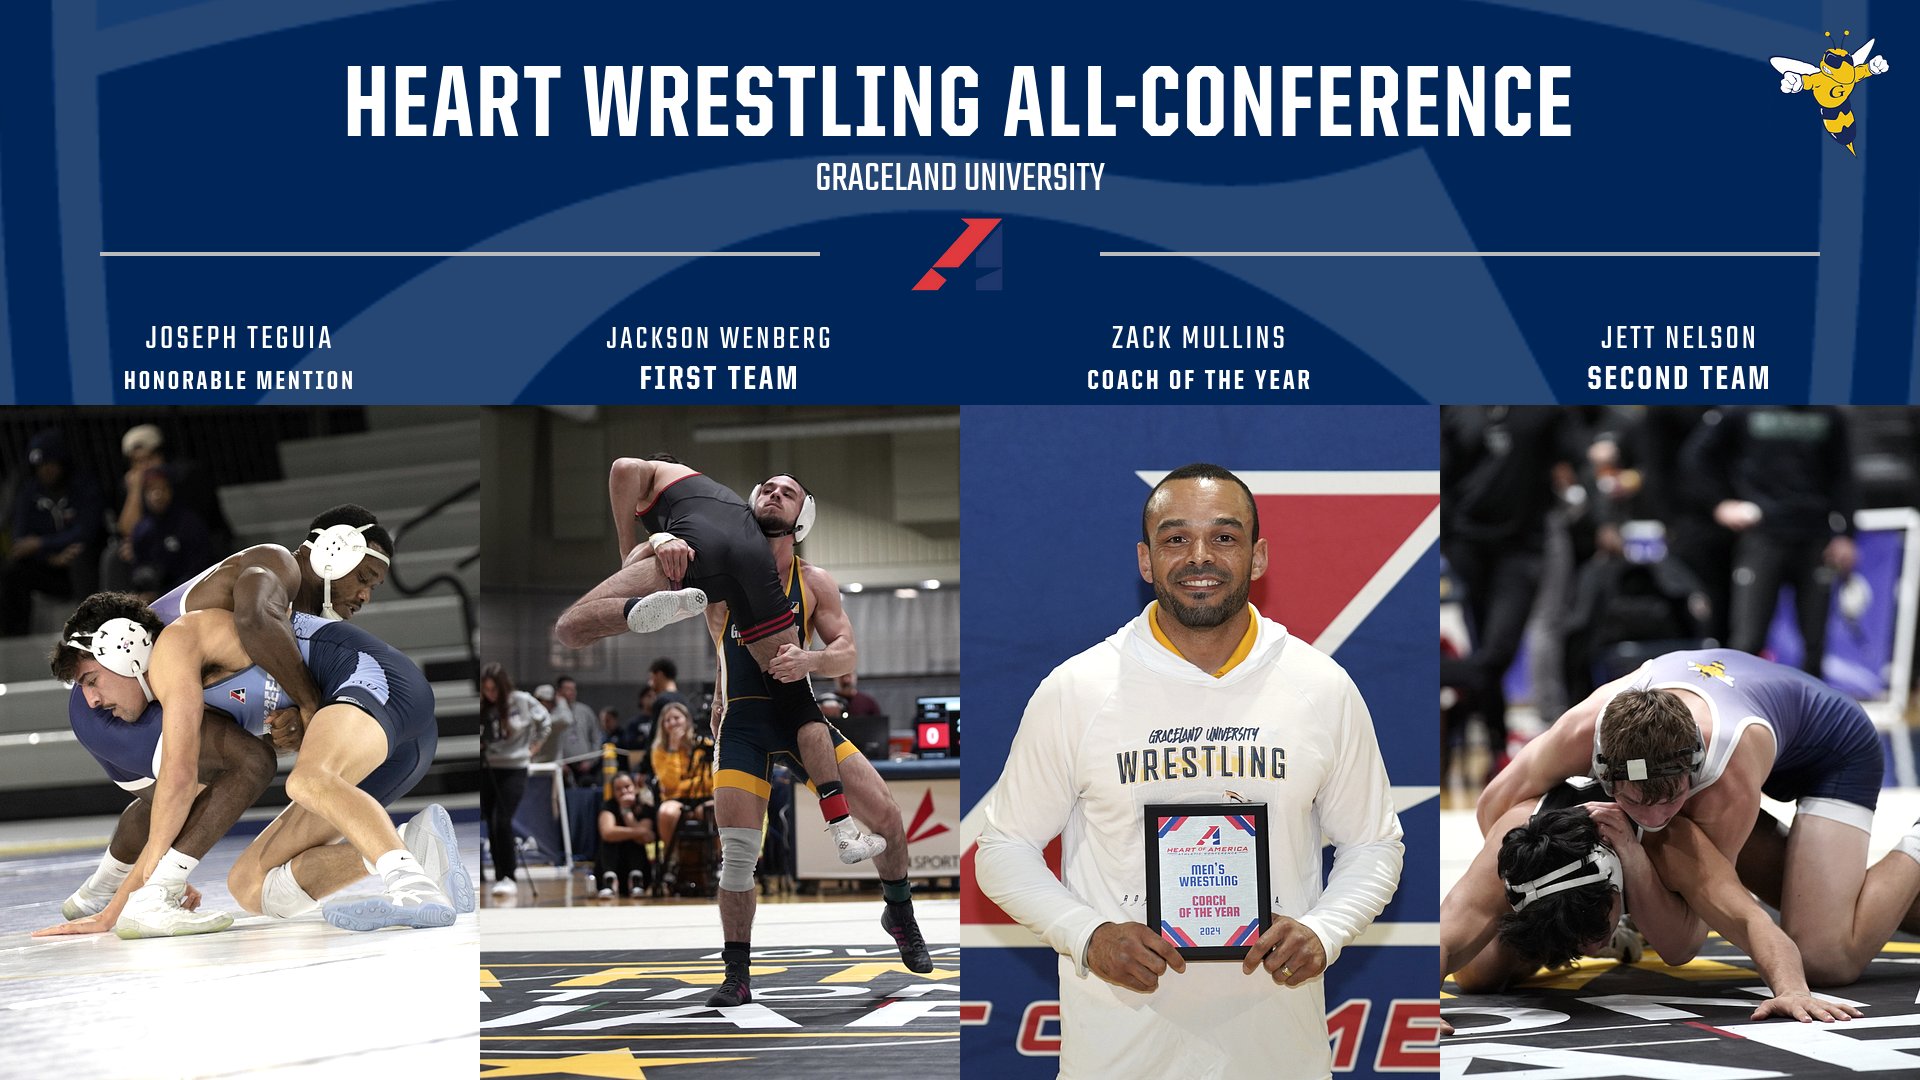 Three Earned All-Conference Honors; Mullins Named Coach of the Year